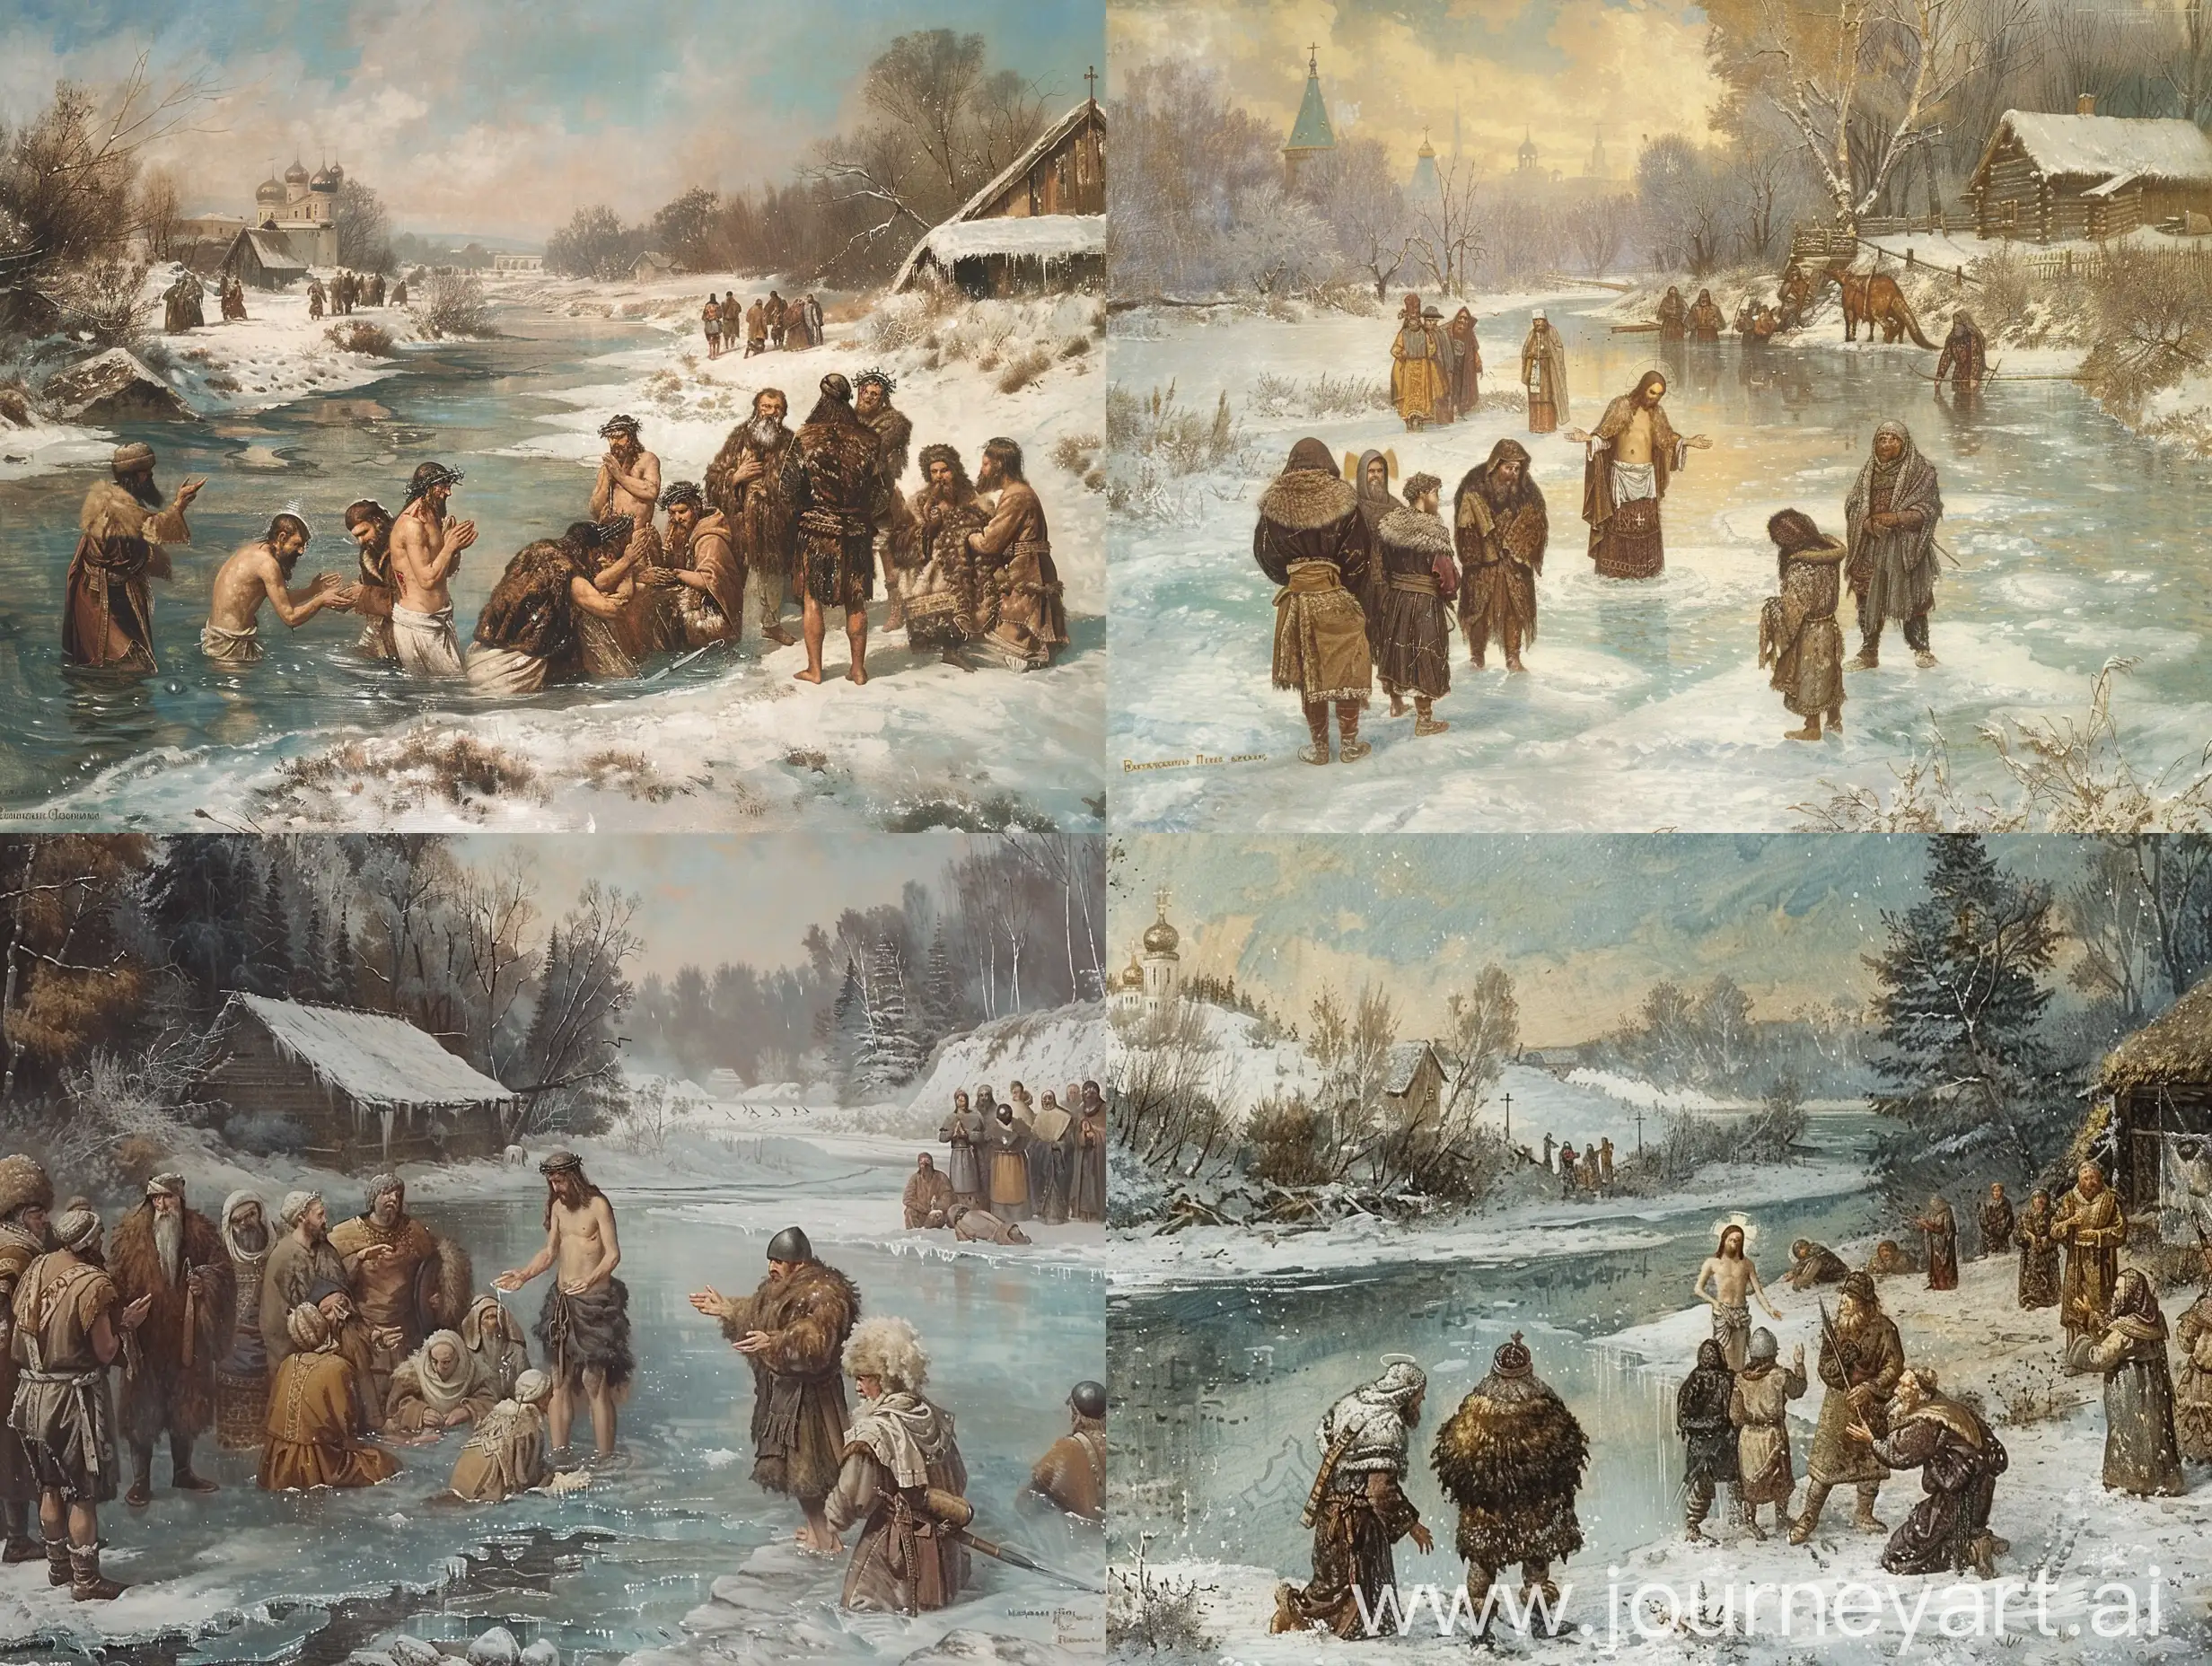 Baptism in Frozen Russian River: "Christ being baptized in a frozen river of medieval Russia, surrounded by figures in heavy furs and woolen garments, with the serene winter landscape adding to the solemnity." based in Anatoly Timofeevich Fomenko e Gleb Vladimirovich Nosovsk books